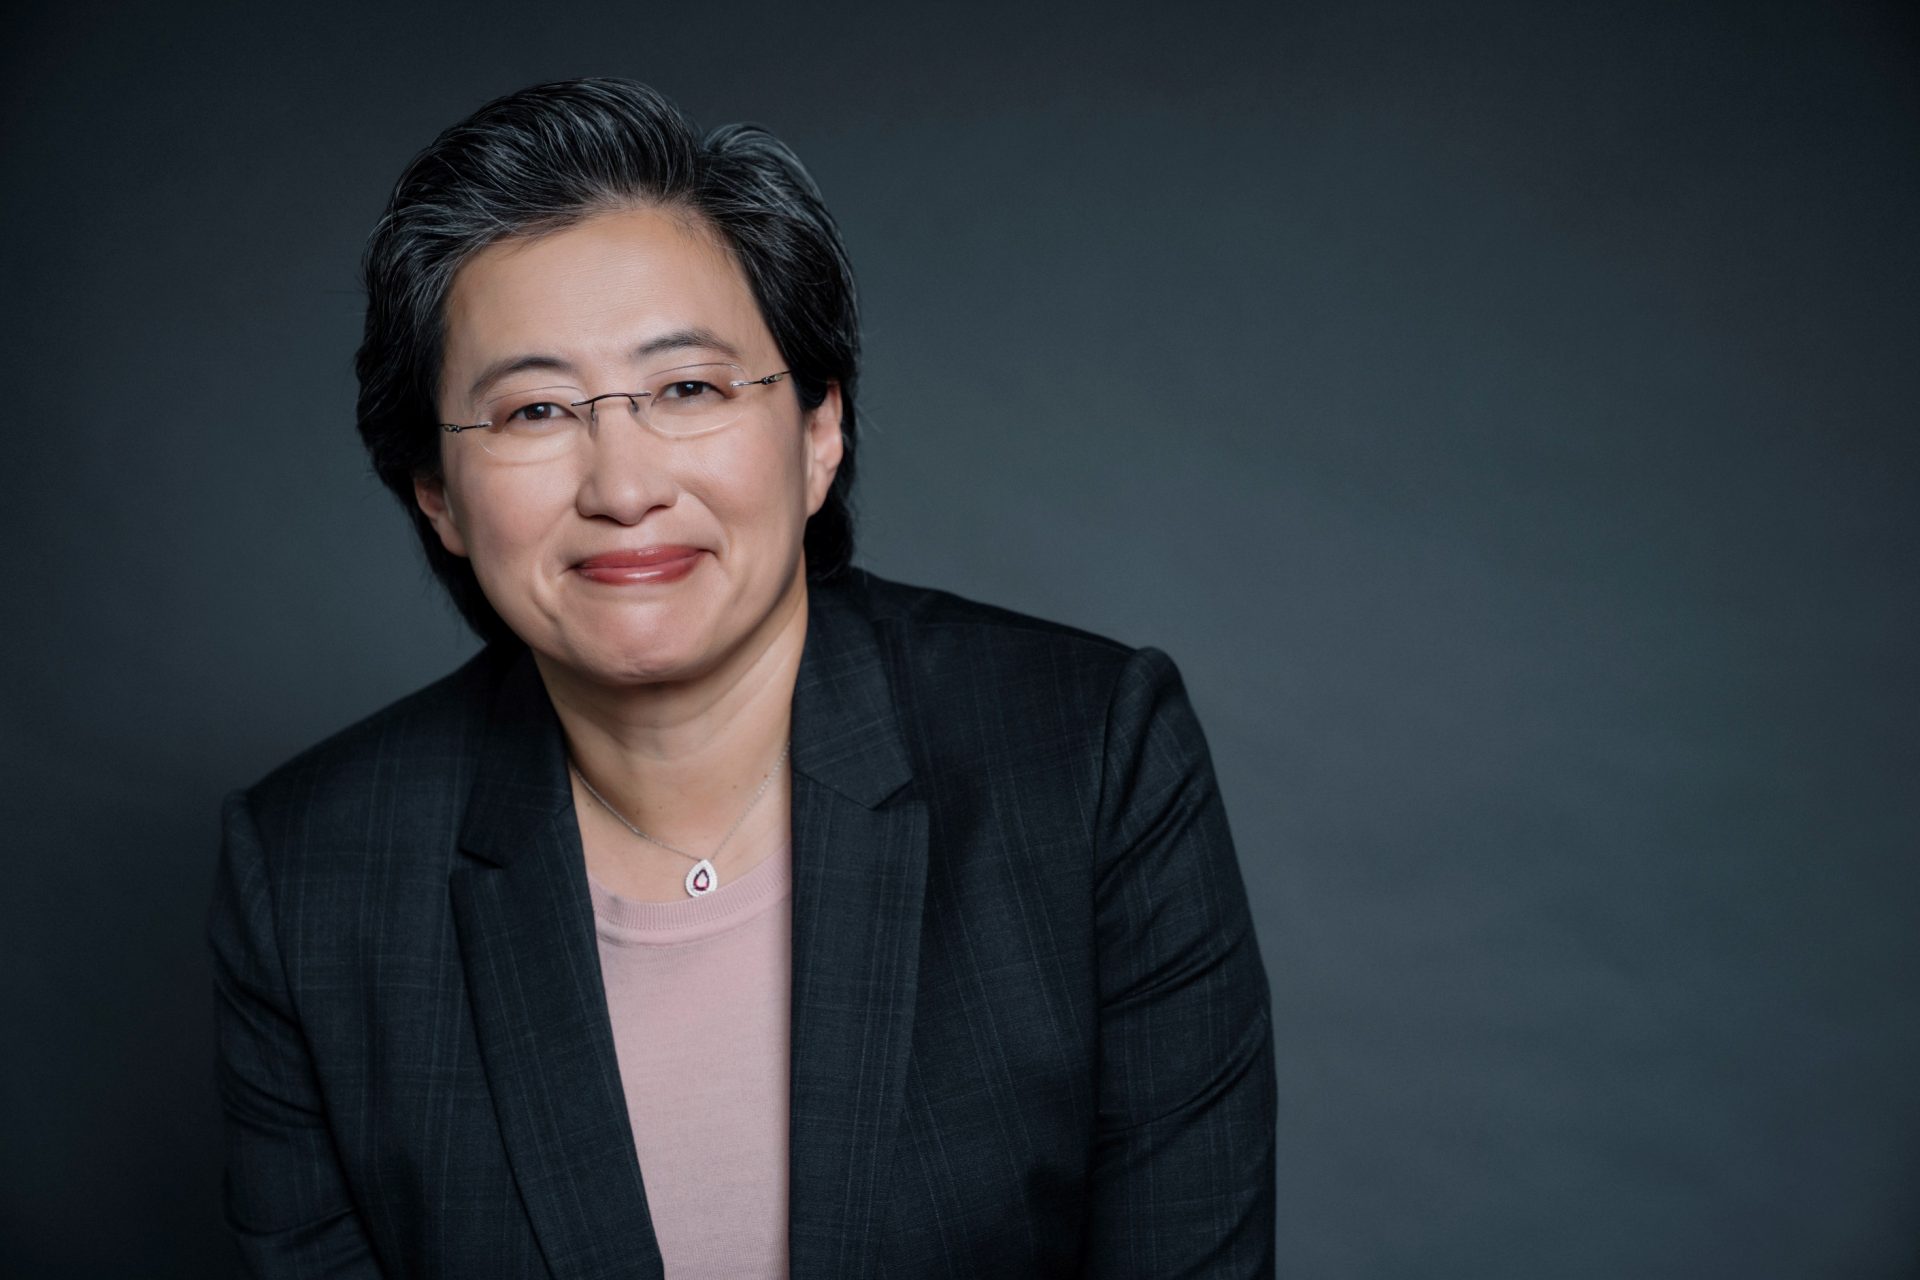 Amd President And Ceo Dr. Lisa Su To Deliver